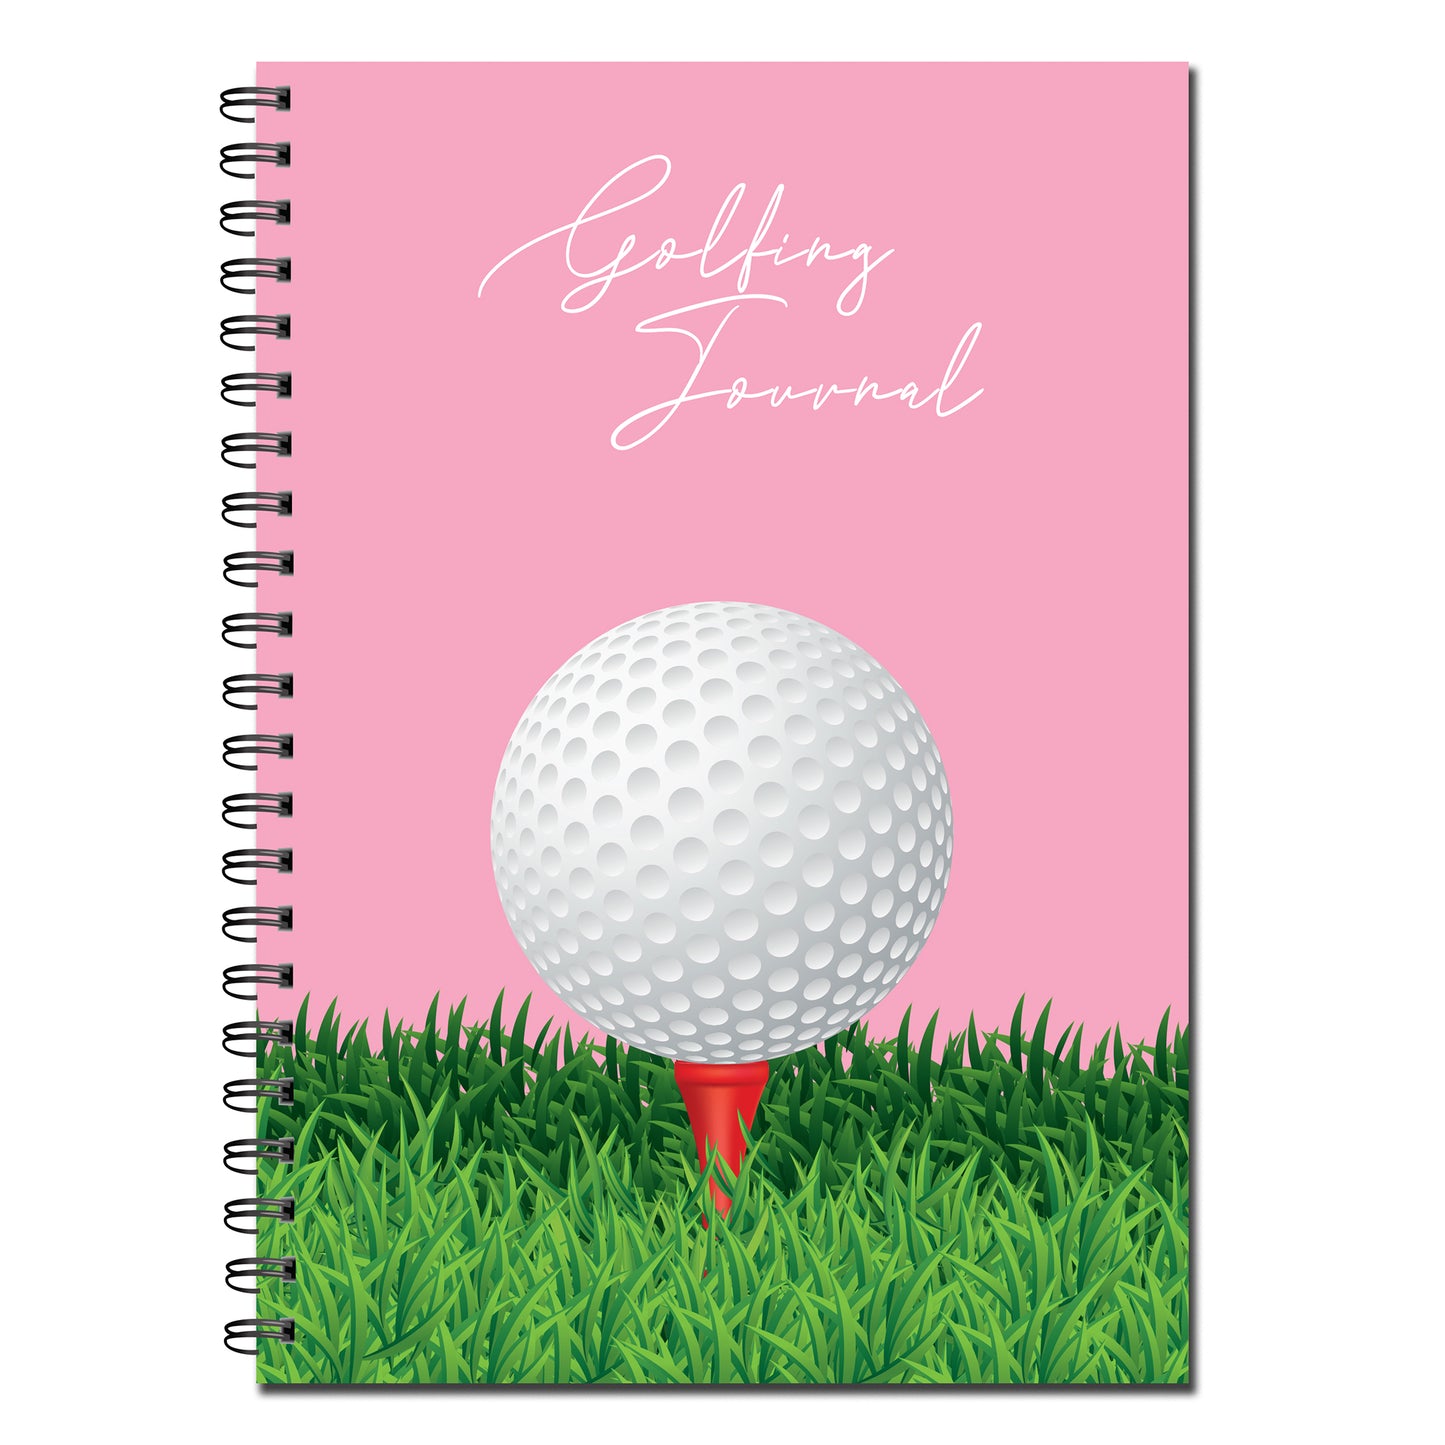 Golfing Journal | Notes | A5 (148mm x 210mm) | 50 double sided pages Wirobound